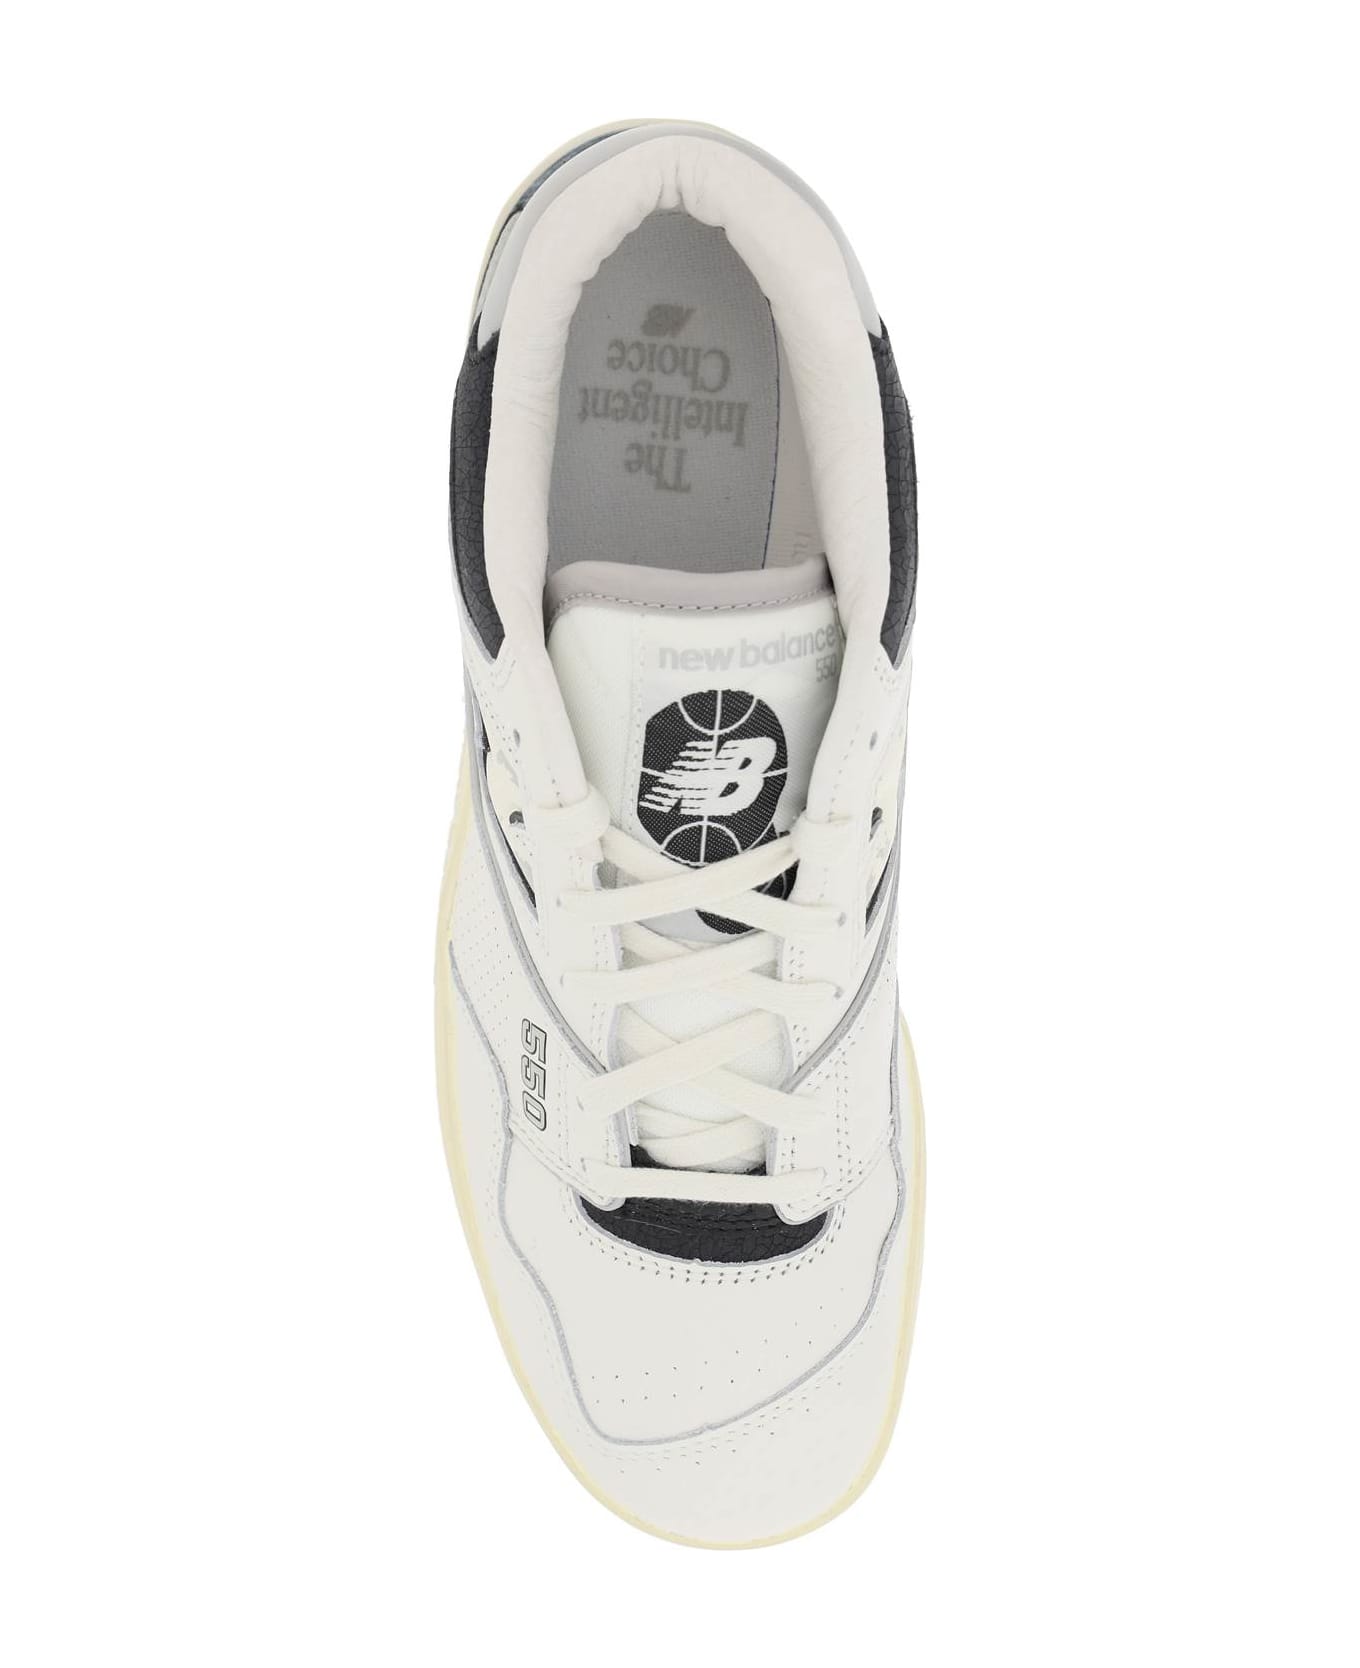 New Balance Vintage-effect 550 Sneakers - OFF WHITE GREY (White) スニーカー